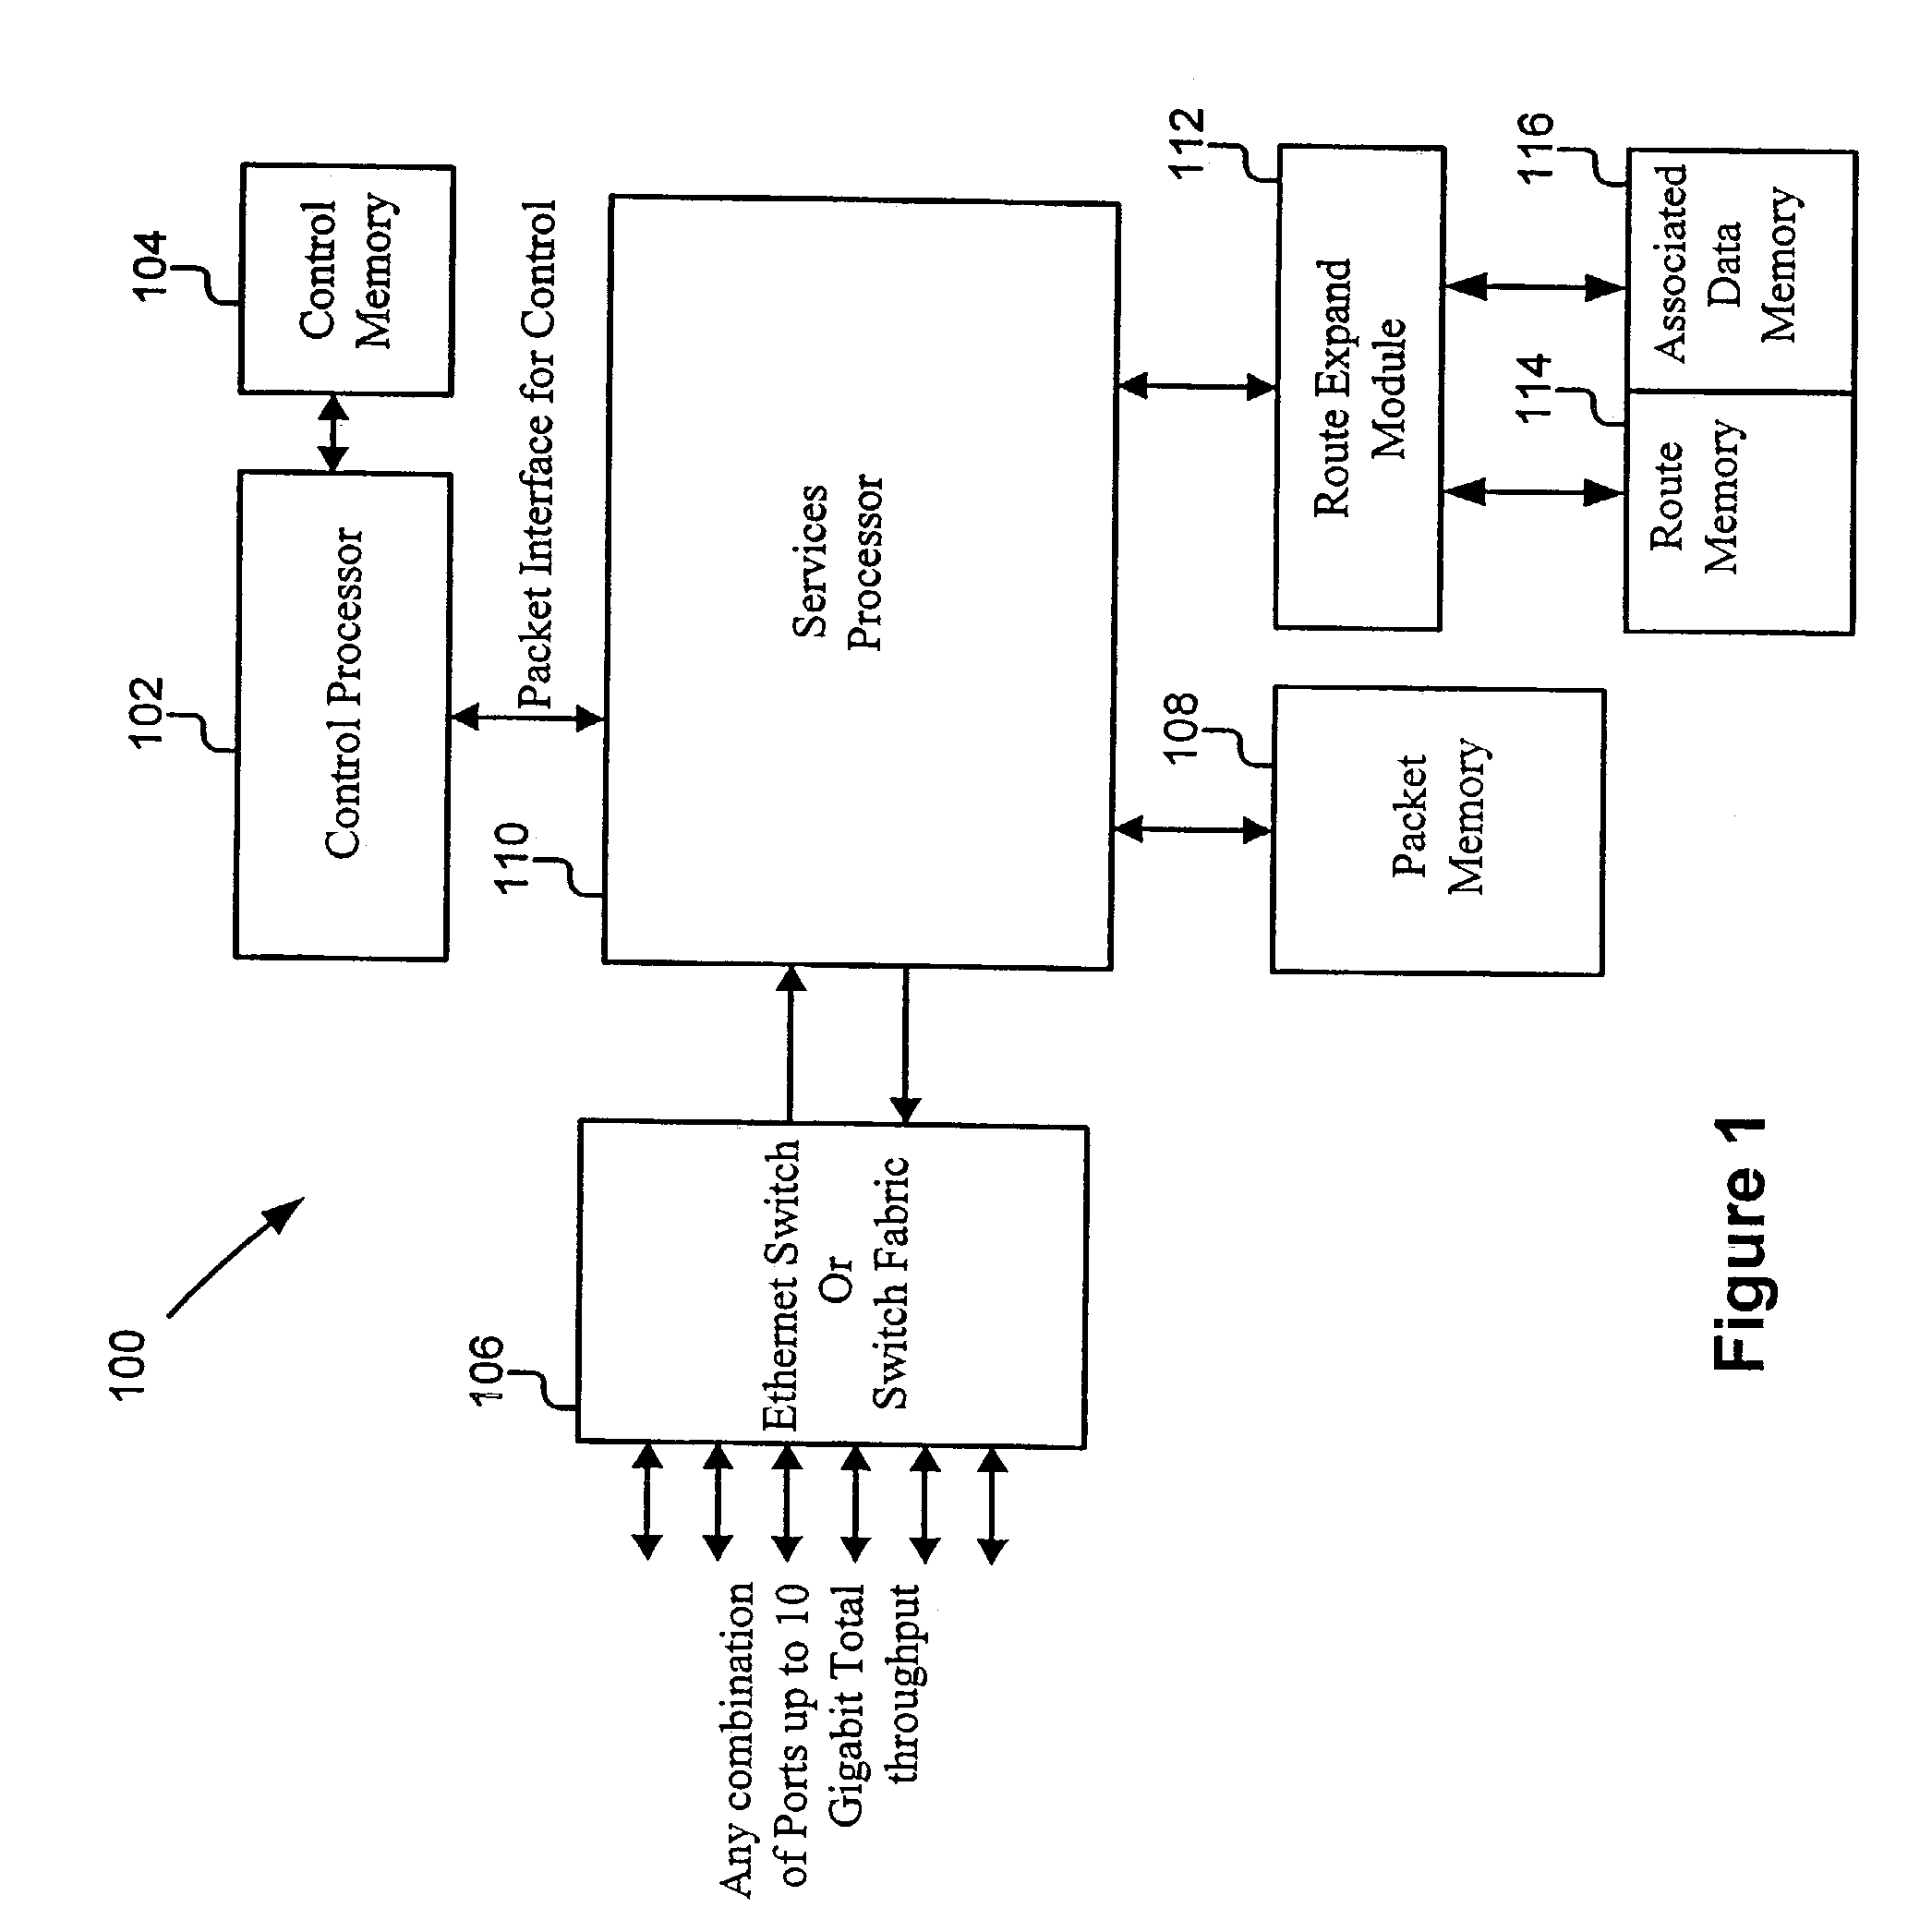 System and method for packet storage and retrieval